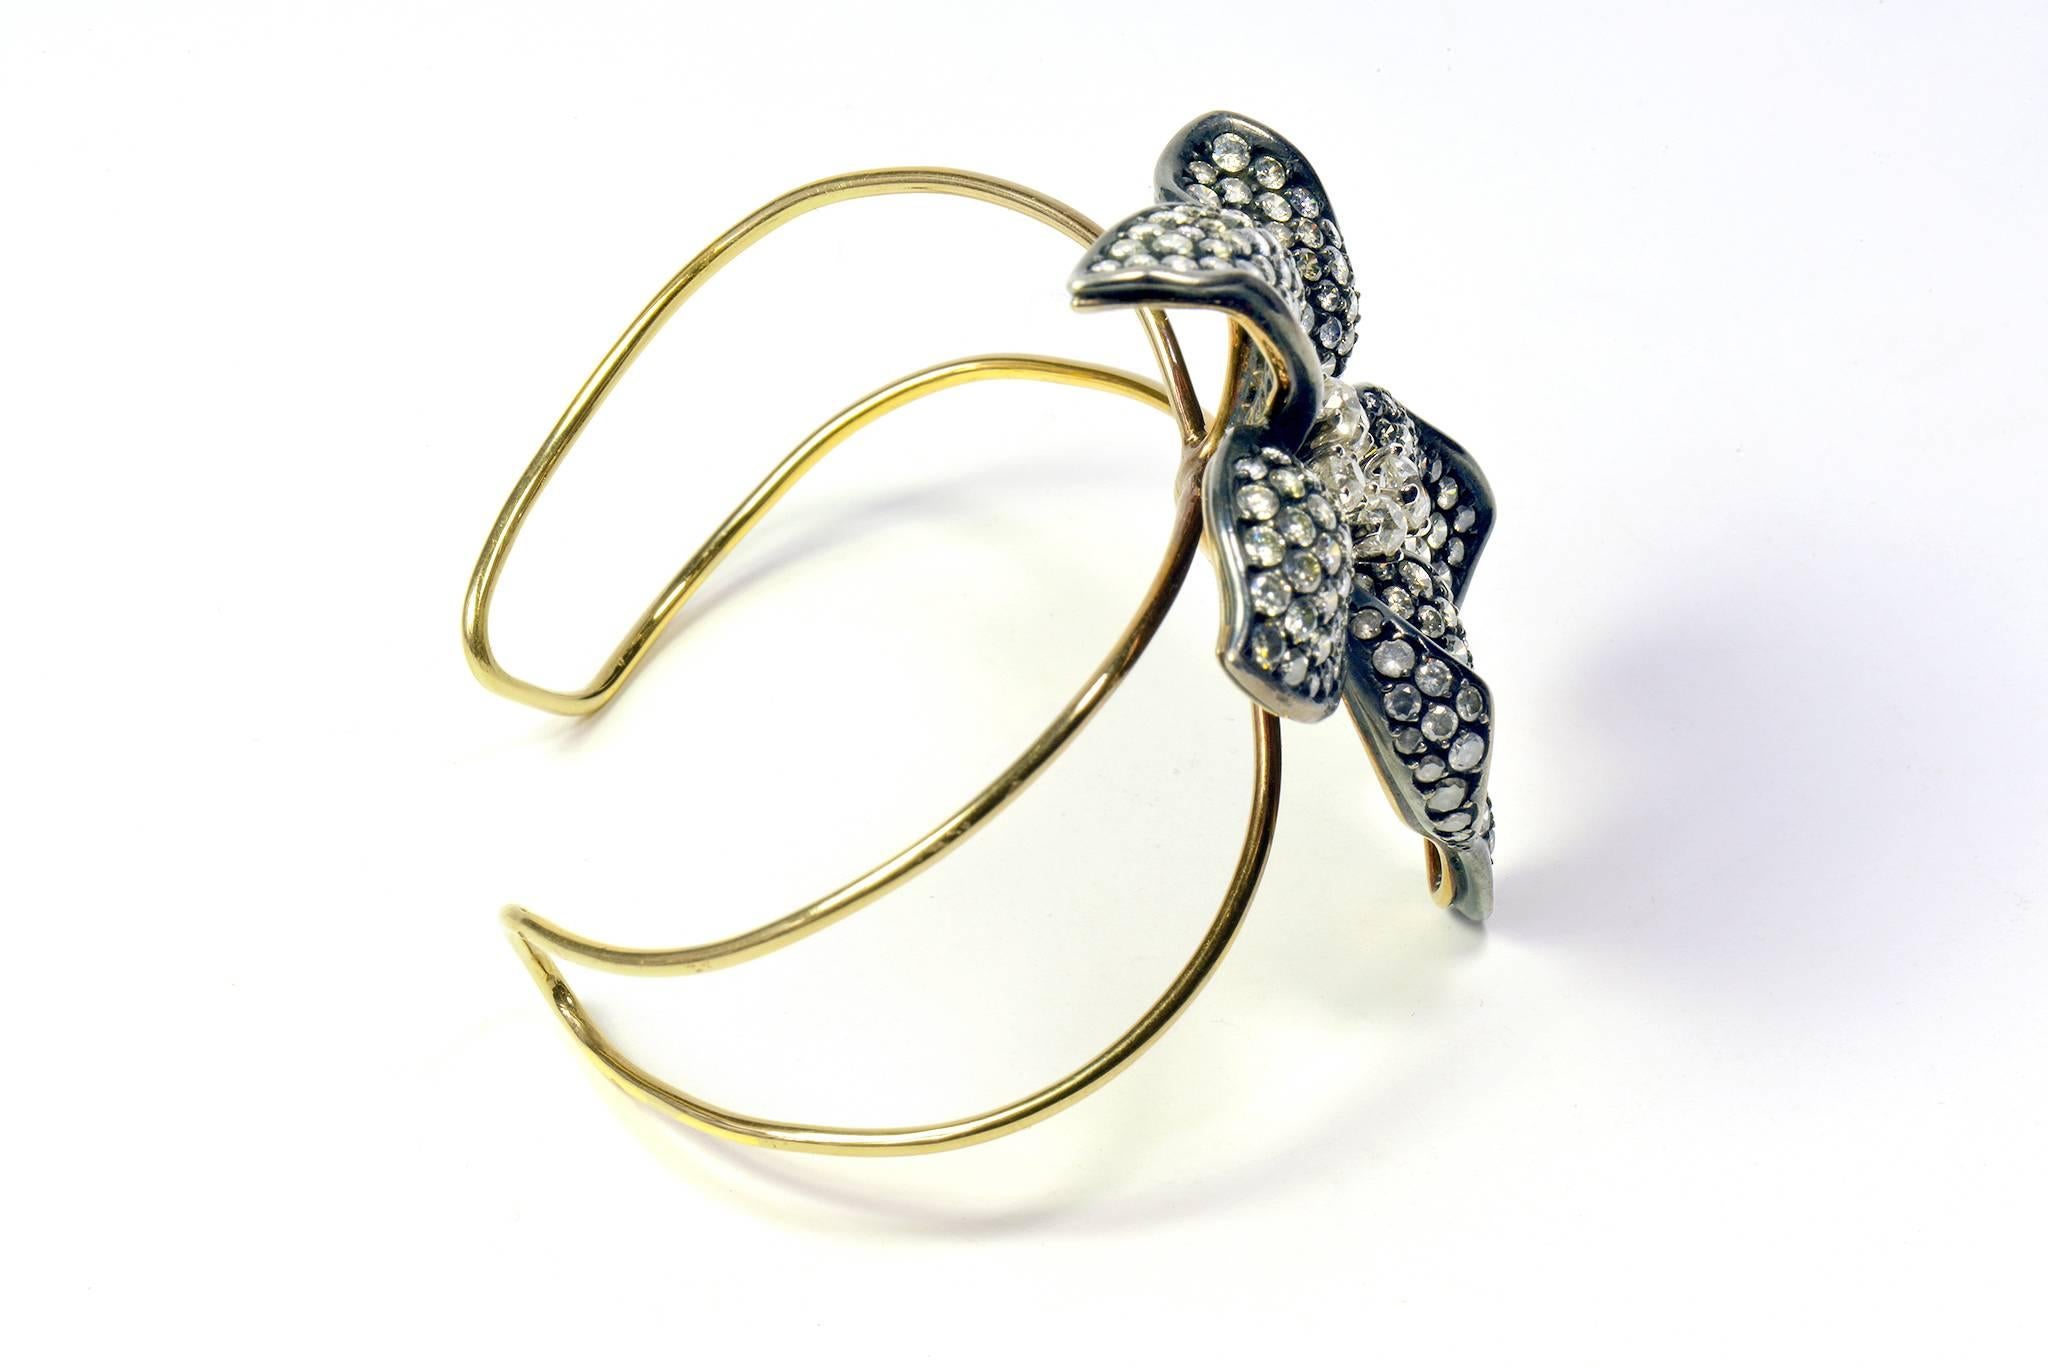 Contemporary Unique Flower 18k Gold Bangle Bracelet Set With White and Grey Diamonds For Sale